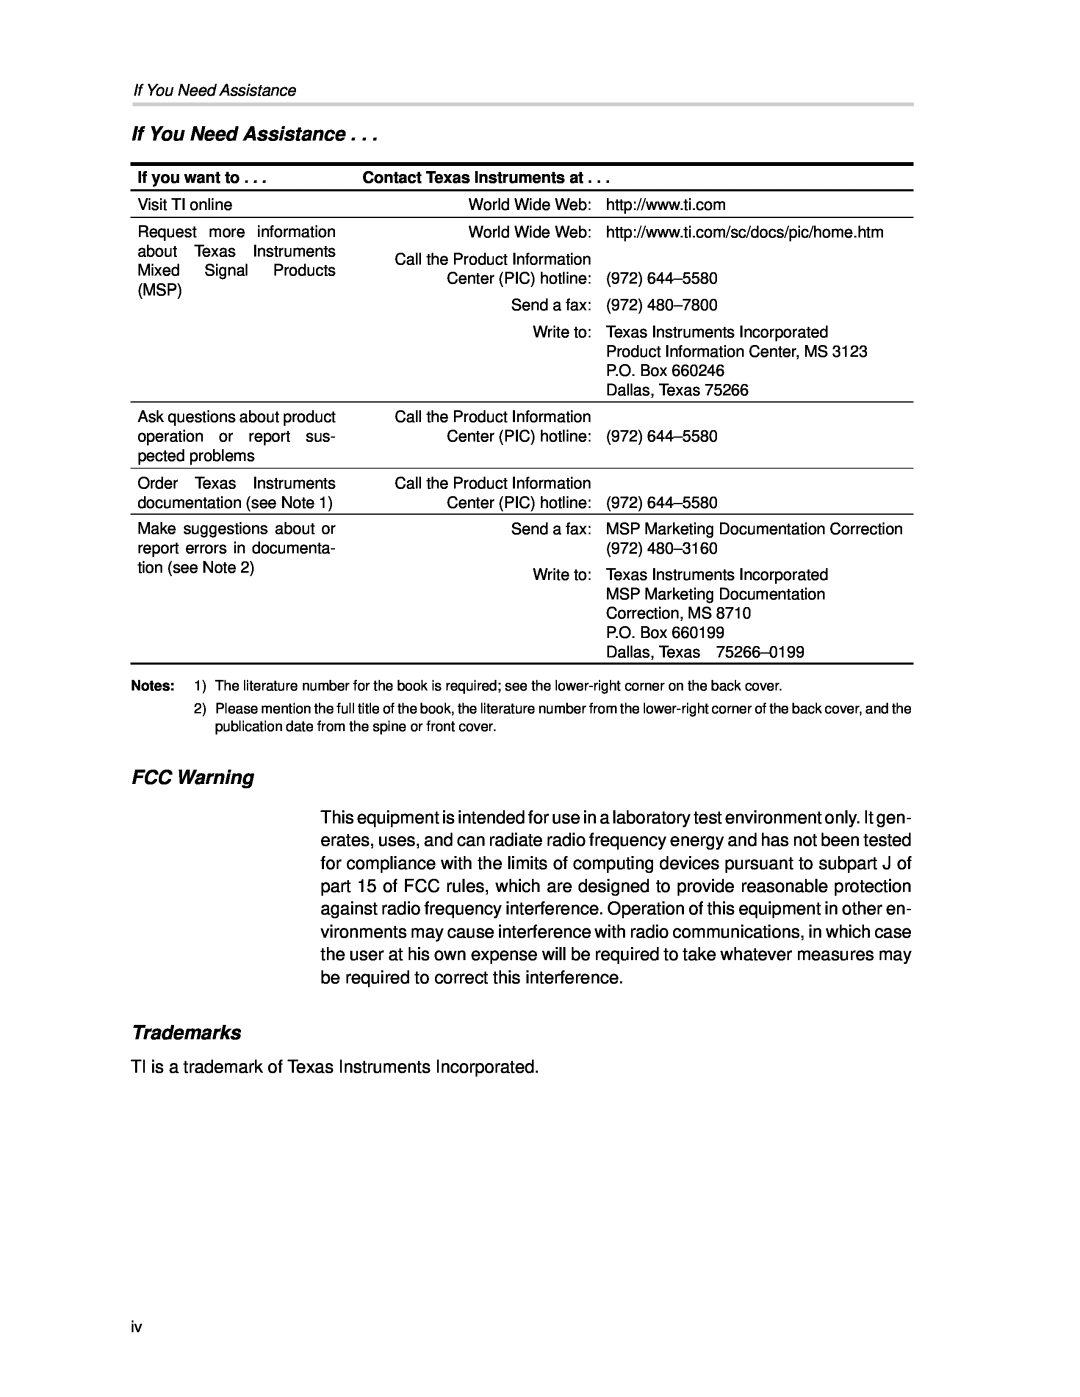 Texas Instruments SLVP089 manual If You Need Assistance, FCC Warning, Trademarks 